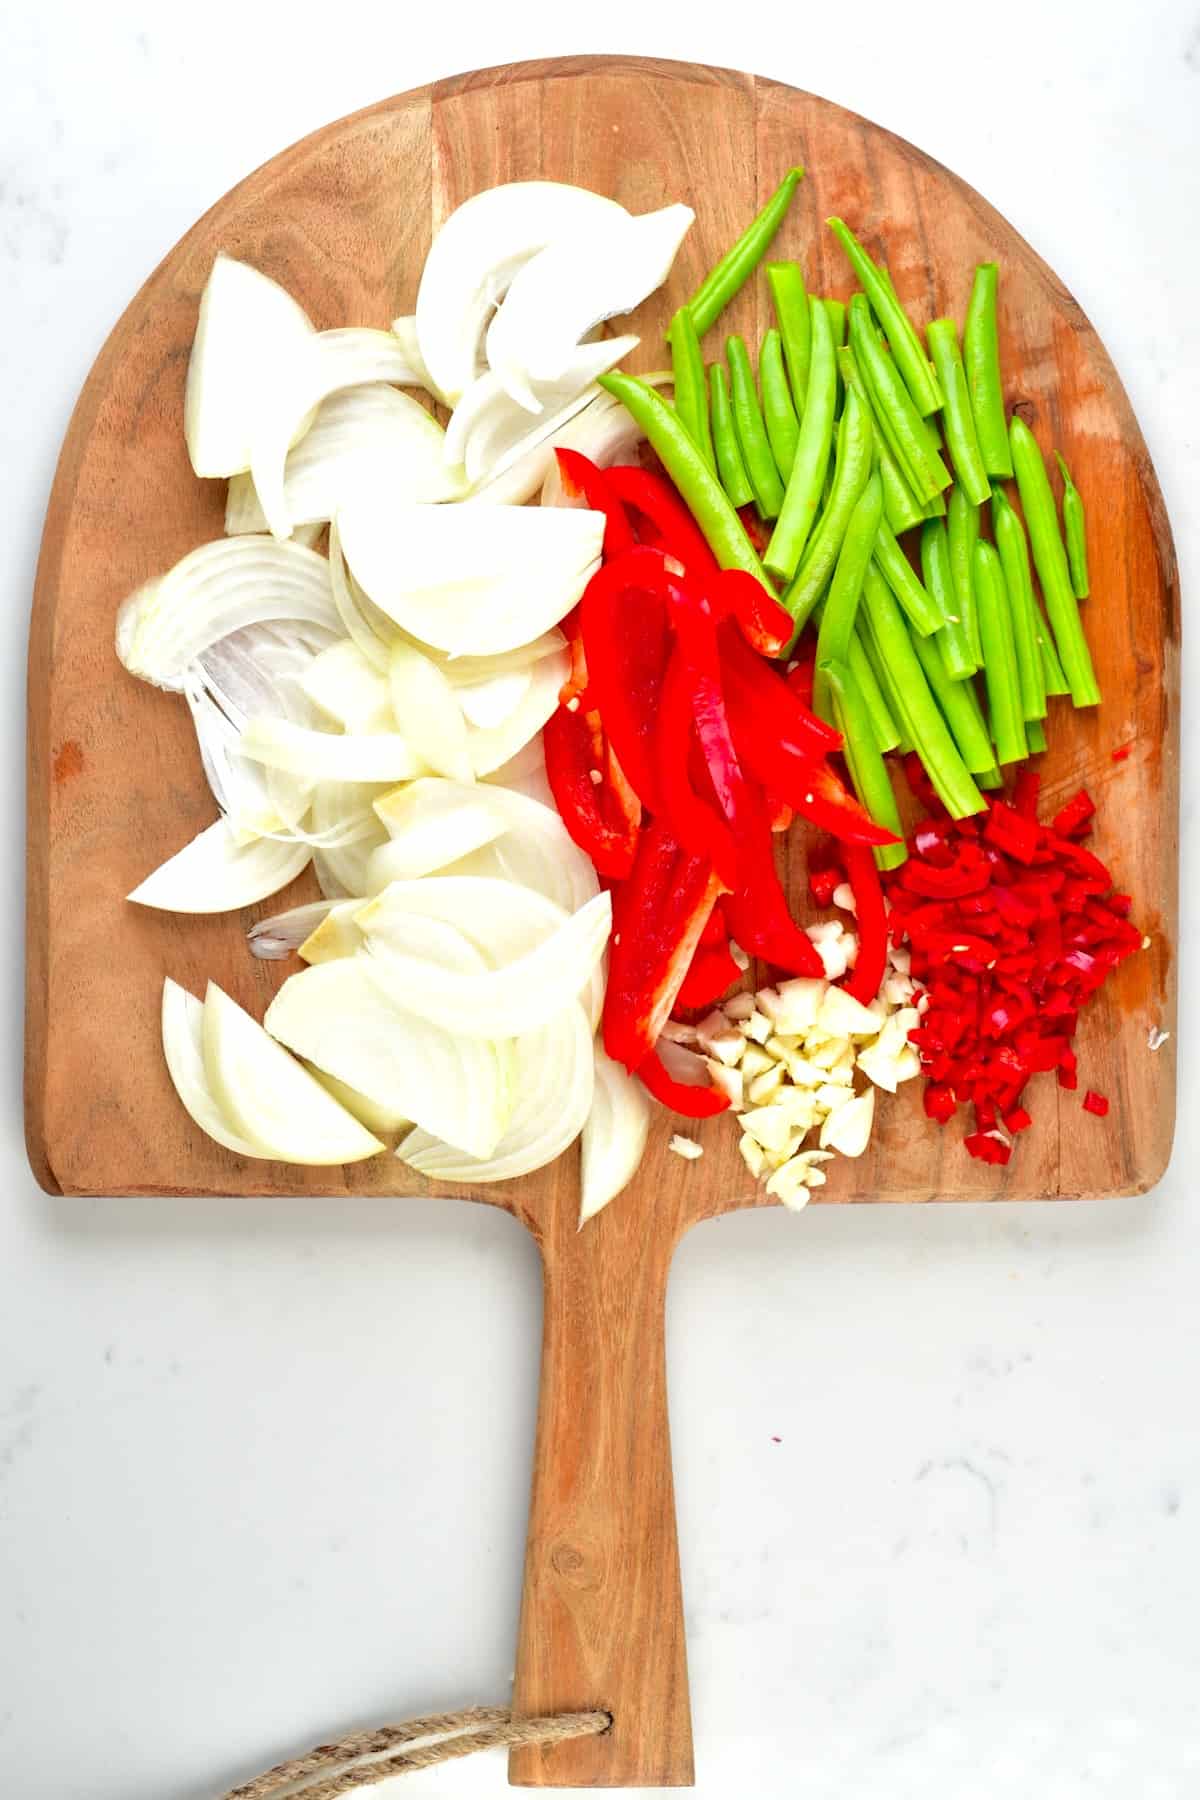 Chopped vegetables on a wooden board